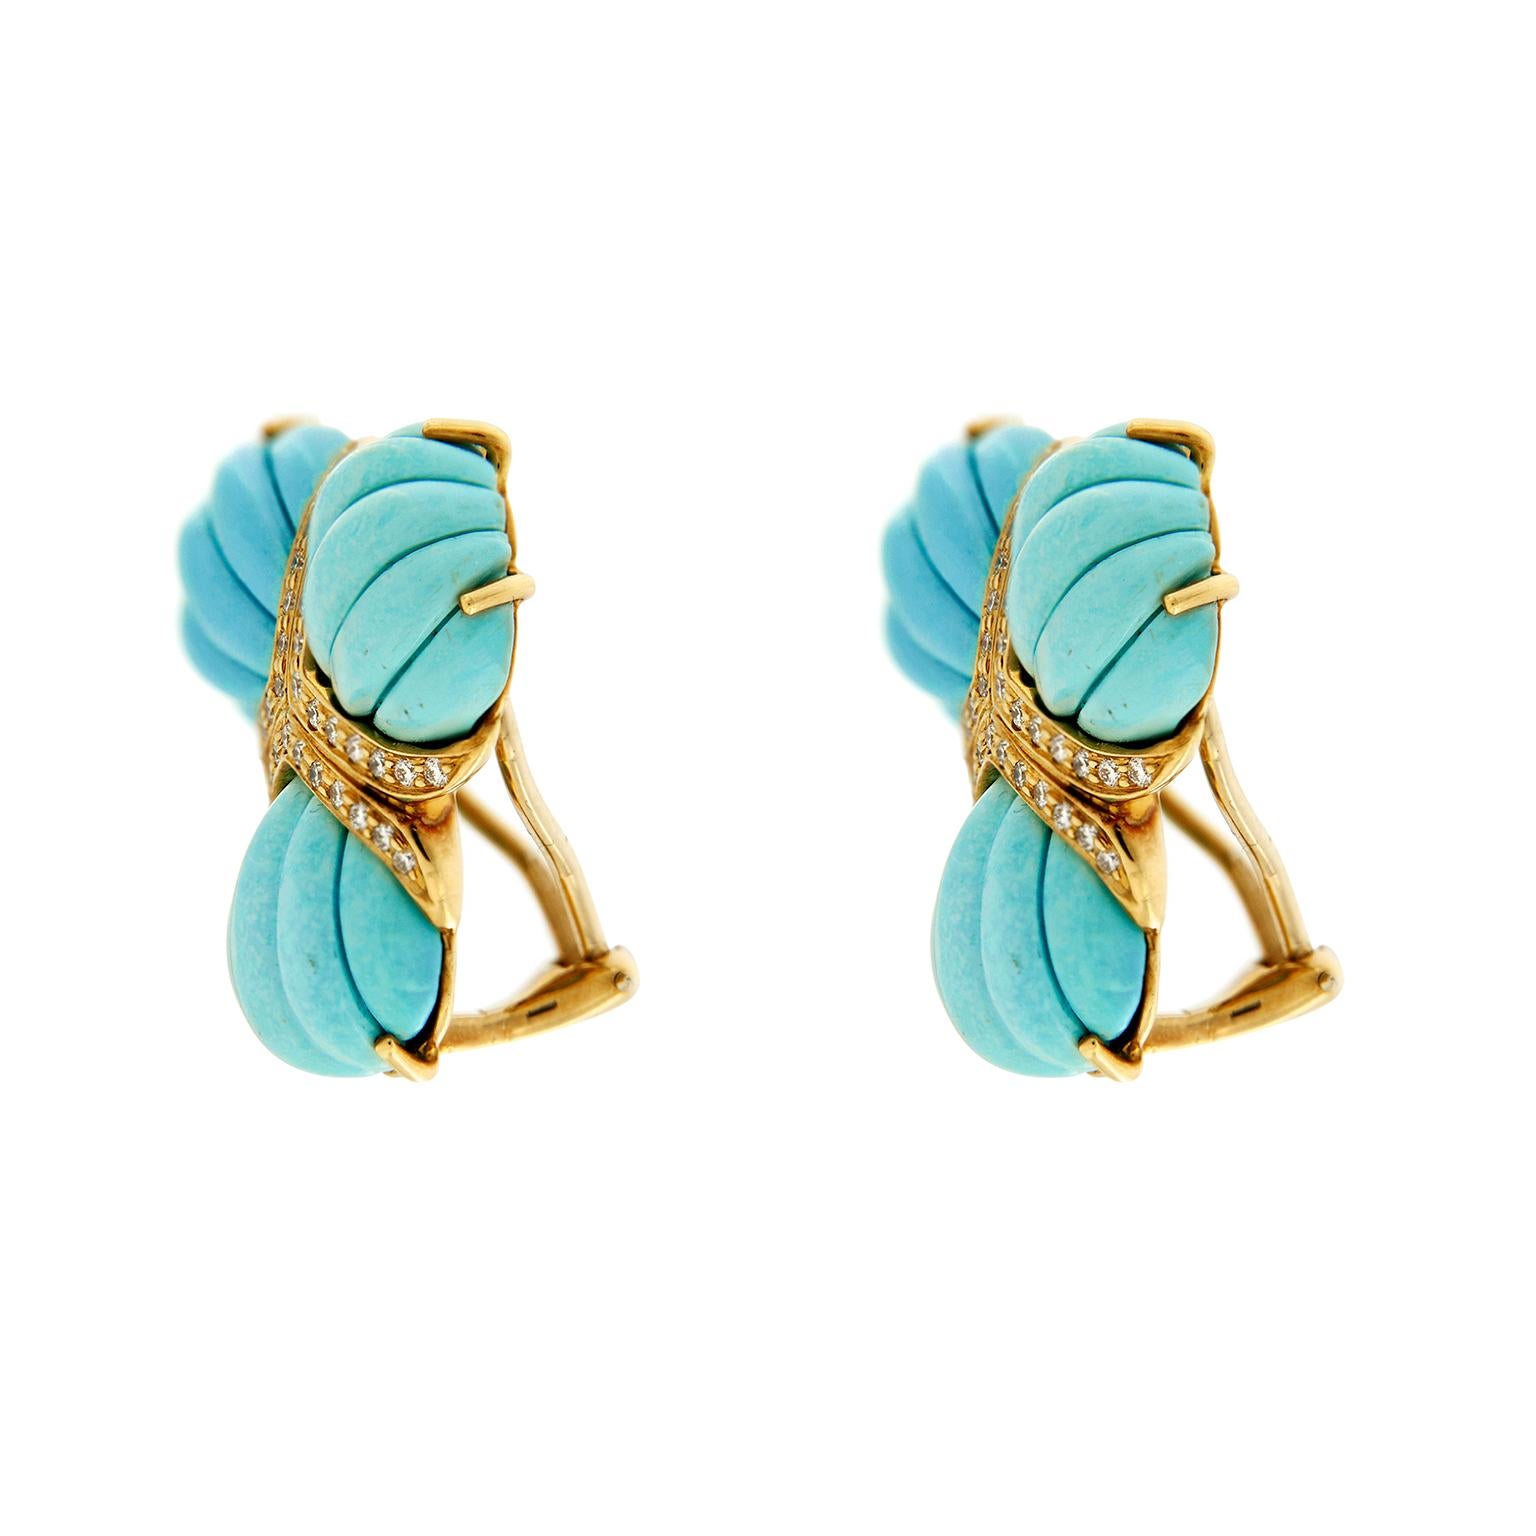 Cool tones adorn these earrings created by Valentin Magro. Fine blue turquoise is special cut into fan shapes. The bases of the jewels are edged in round brilliant cut diamonds. Their colorless shades compliment turquoises’ hues. The 18k yellow gold